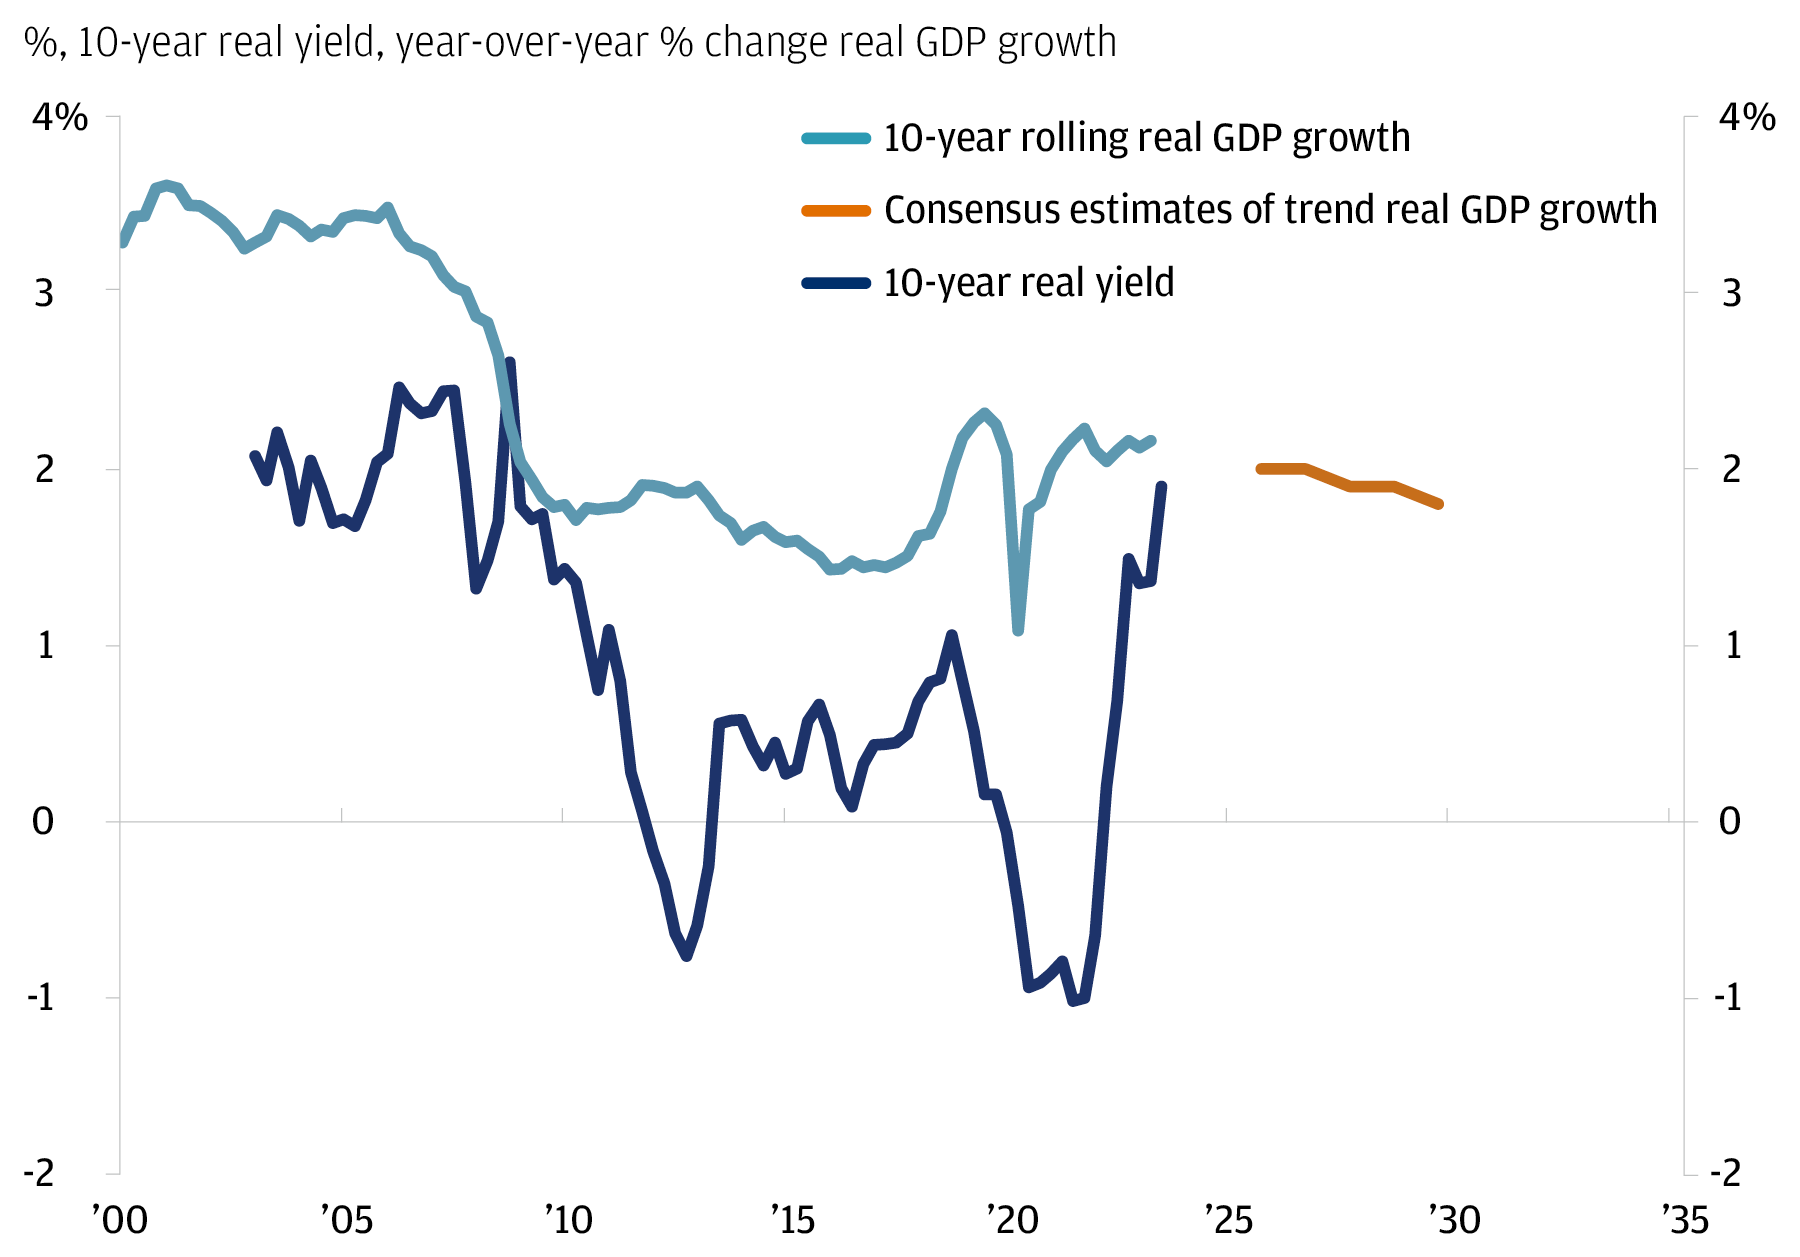 zThe chart describes 10-year real yield, 10-year rolling real GDP growth (year/year % change), and consensus estimates of trend real GDP growth (year/year % change).